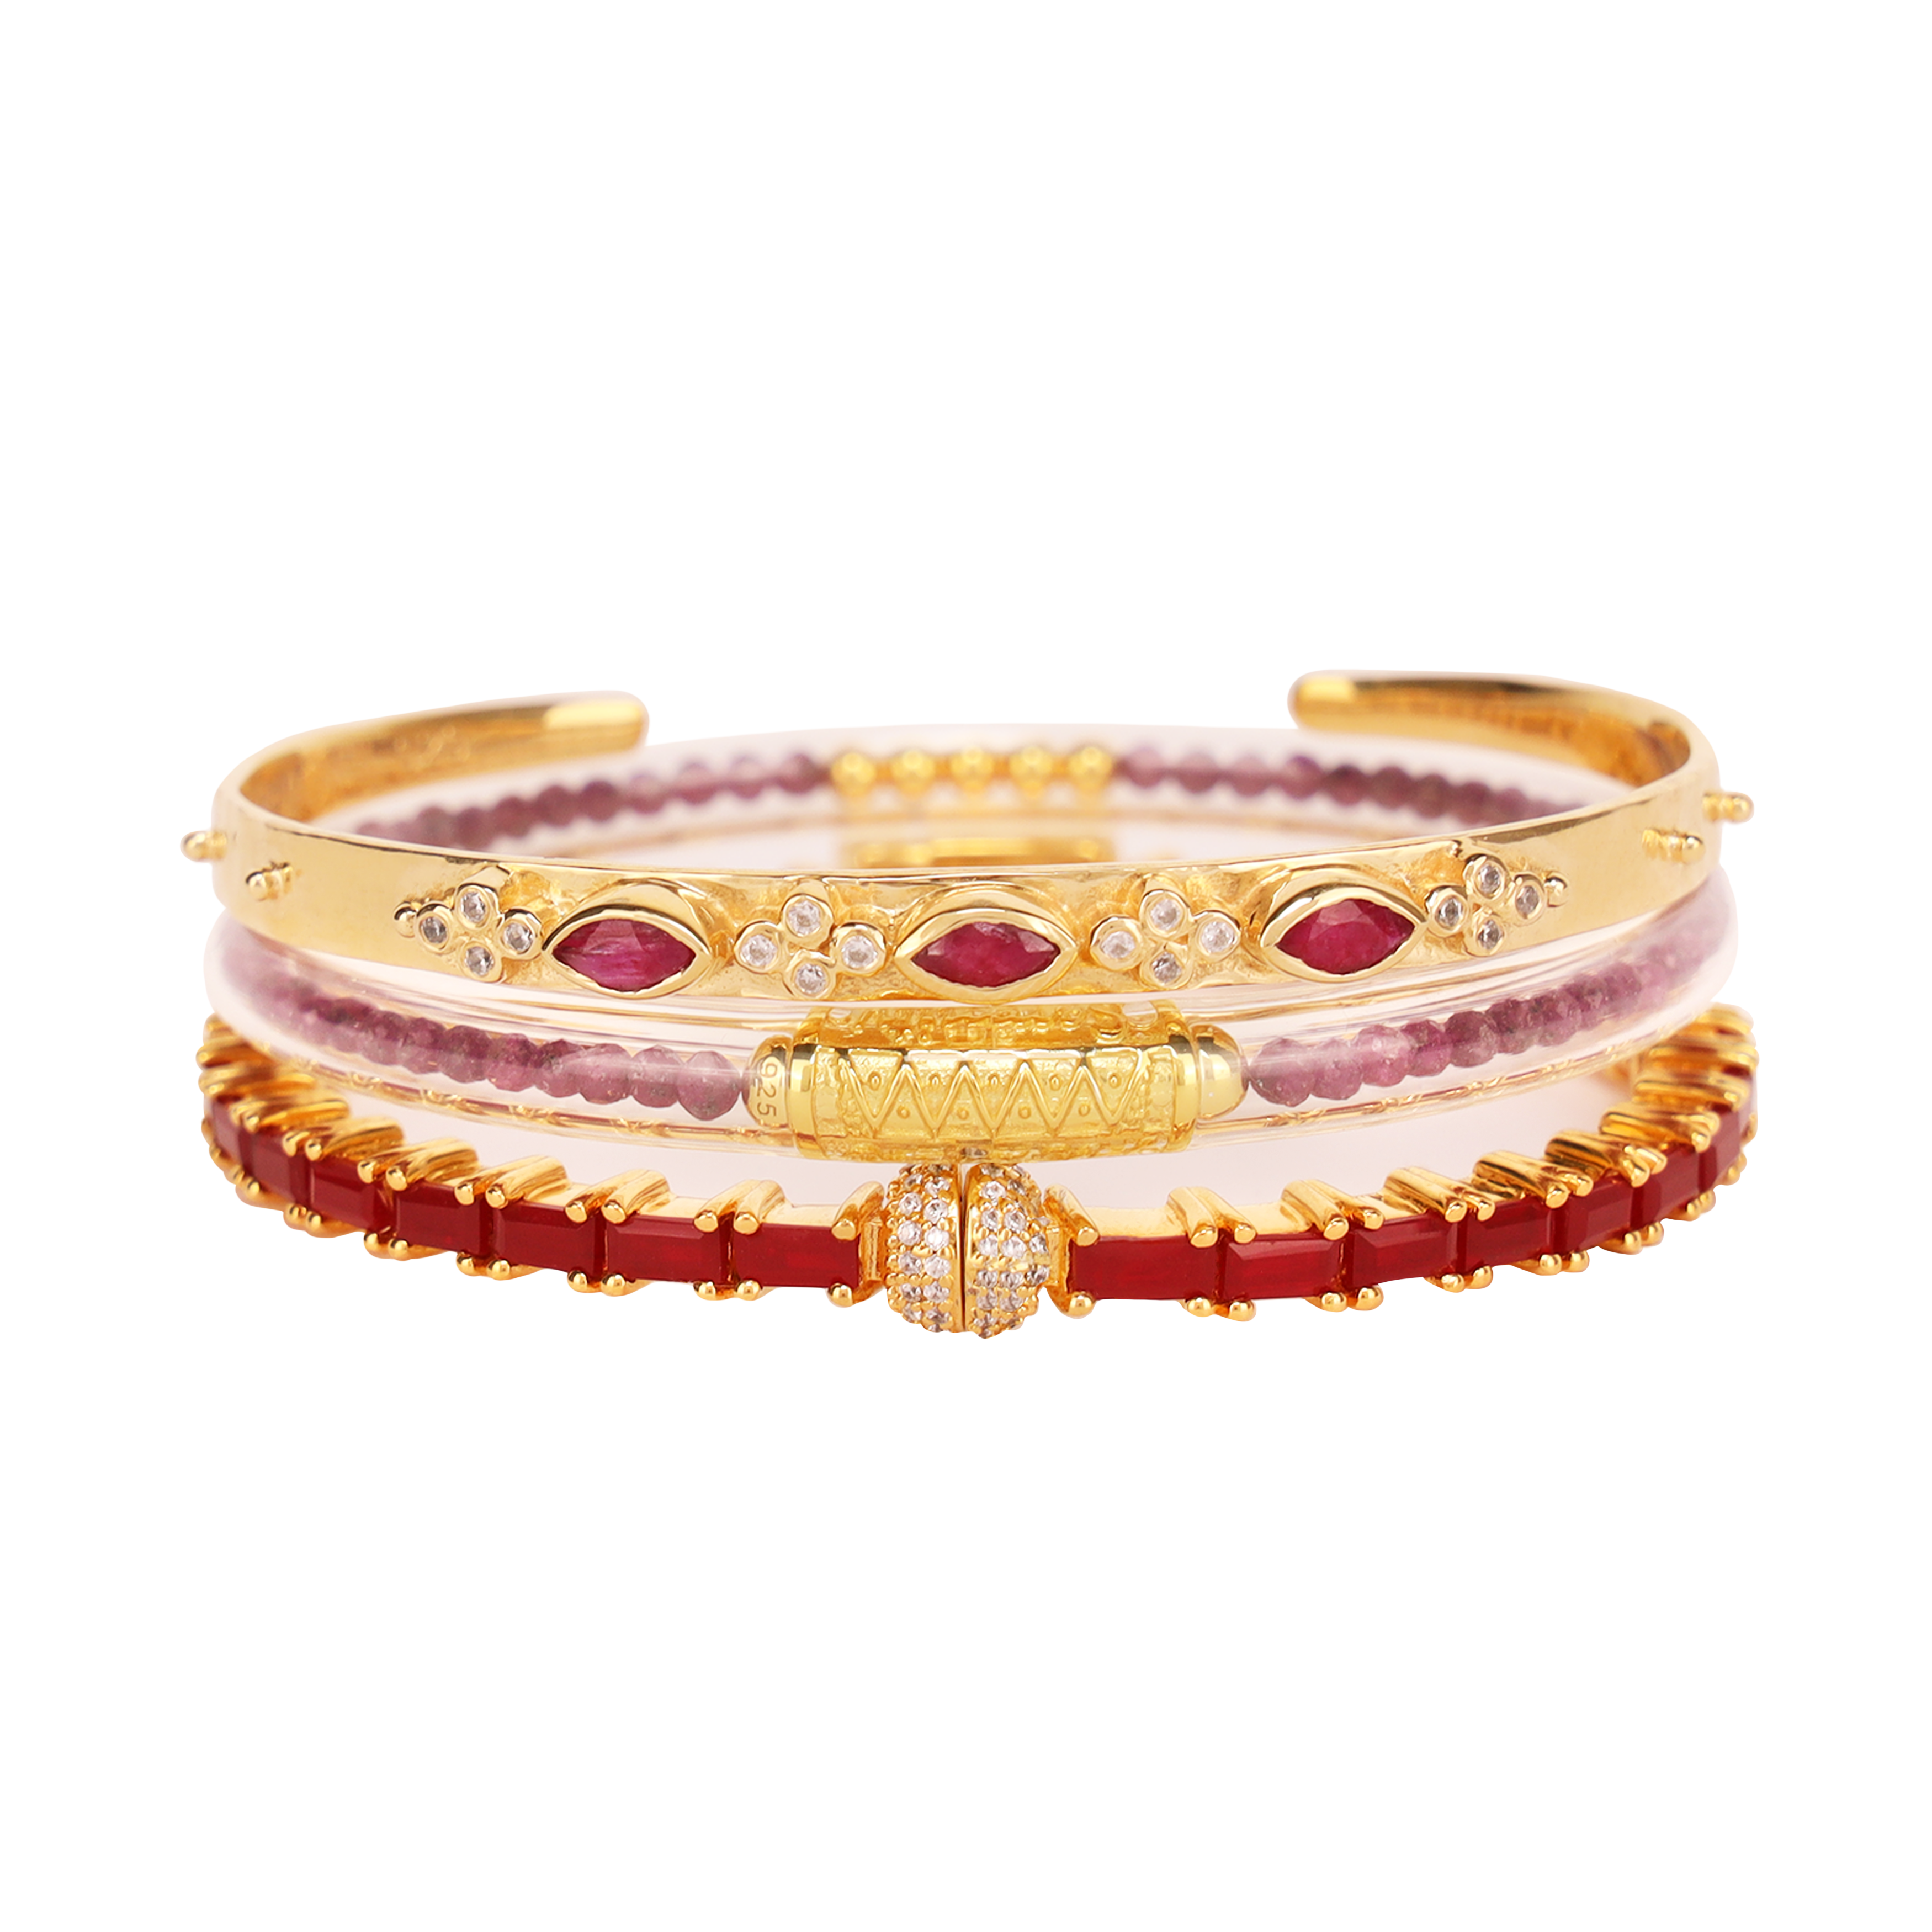 July Birthday Stack Bangle Bracelets for Women - Ruby Luxe All Weather Bangles, Gold Tzubbie All Weather Bangles and Ruby Aurora Crystal bangle bracelet | BuDhaGirl